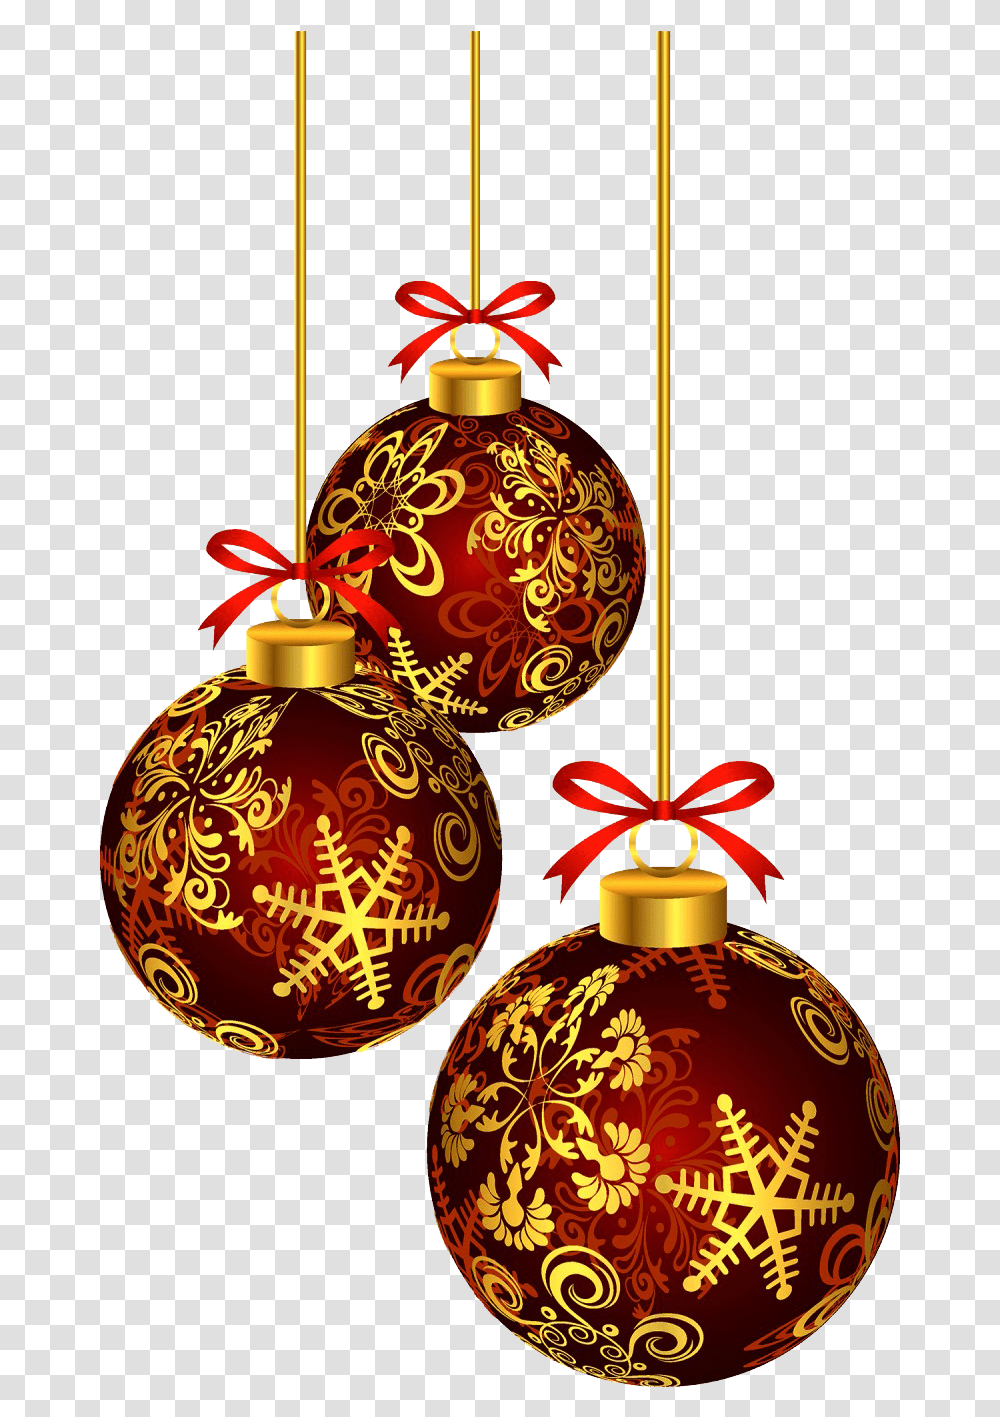 Christmas Ball Image File Gold, Ornament, Bottle, Perfume, Cosmetics Transparent Png